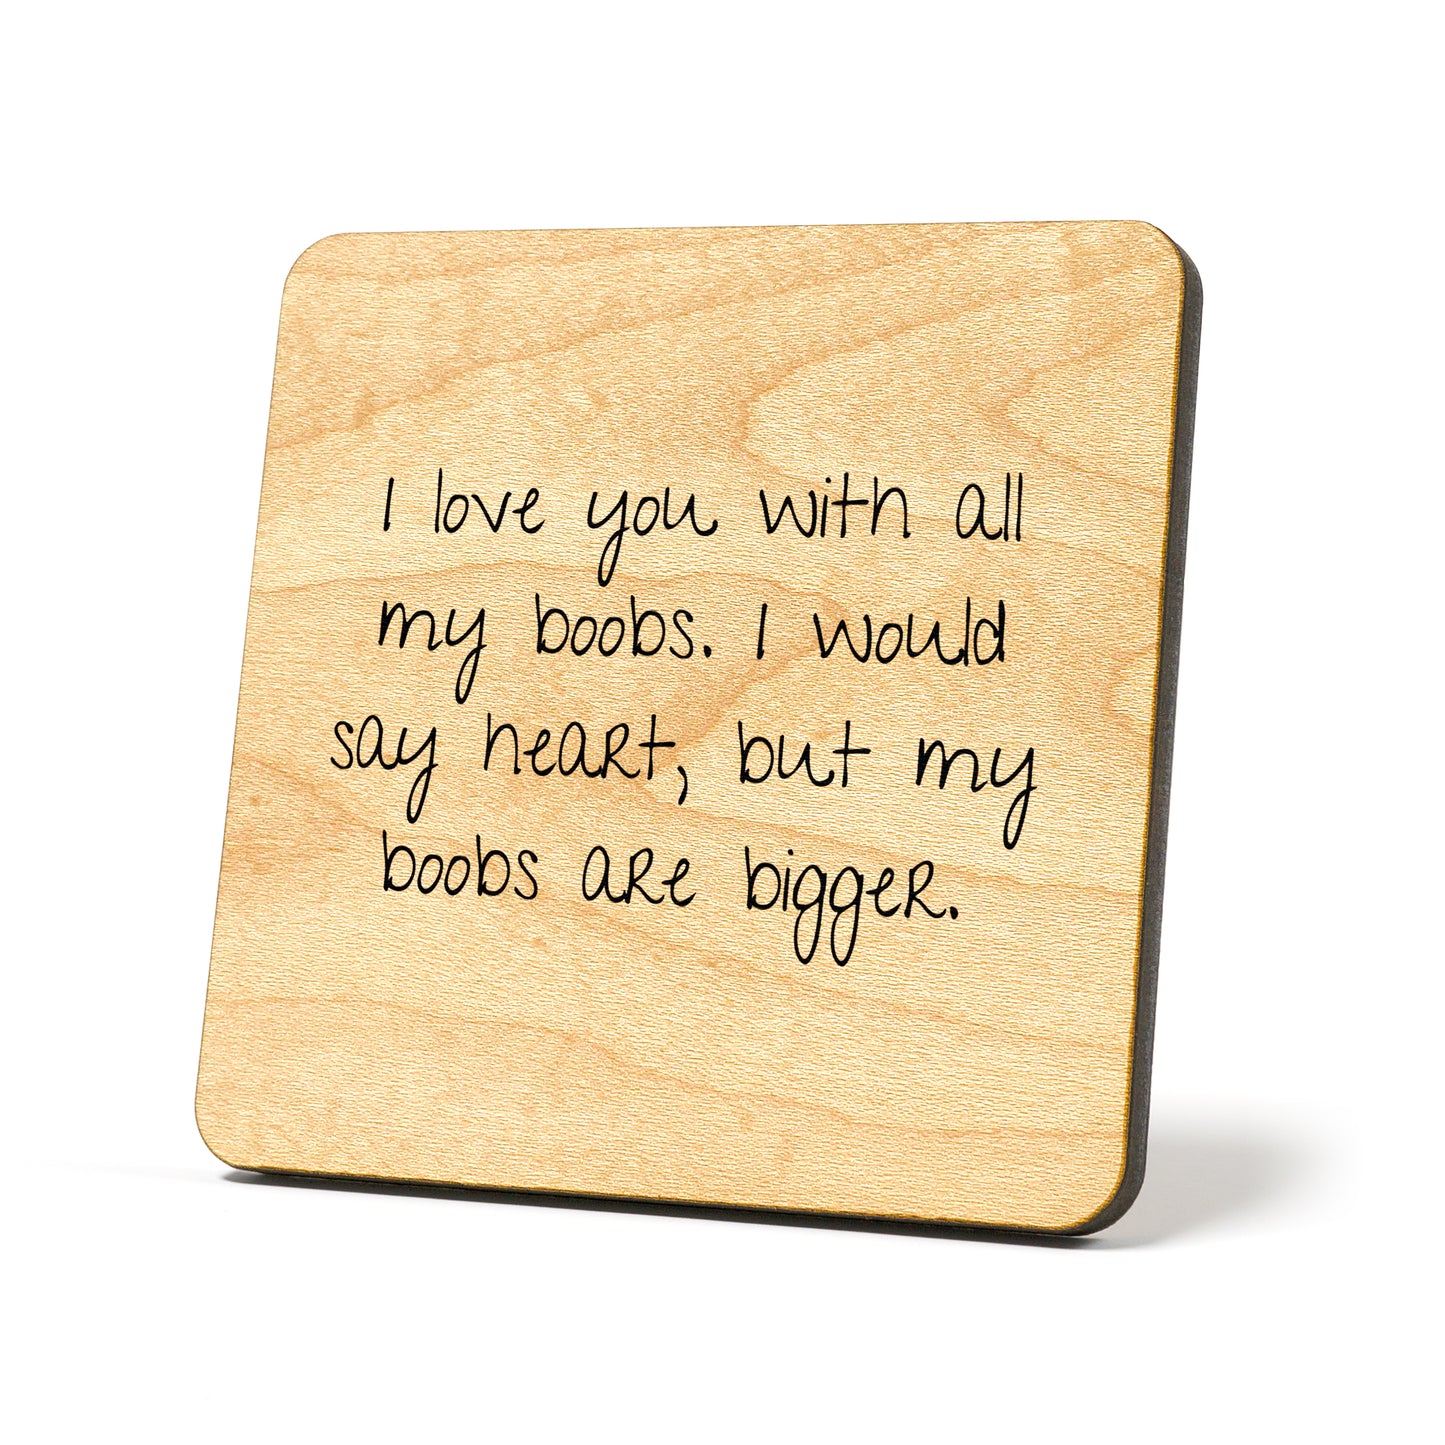 I love you with all of my boobs Quote Coaster